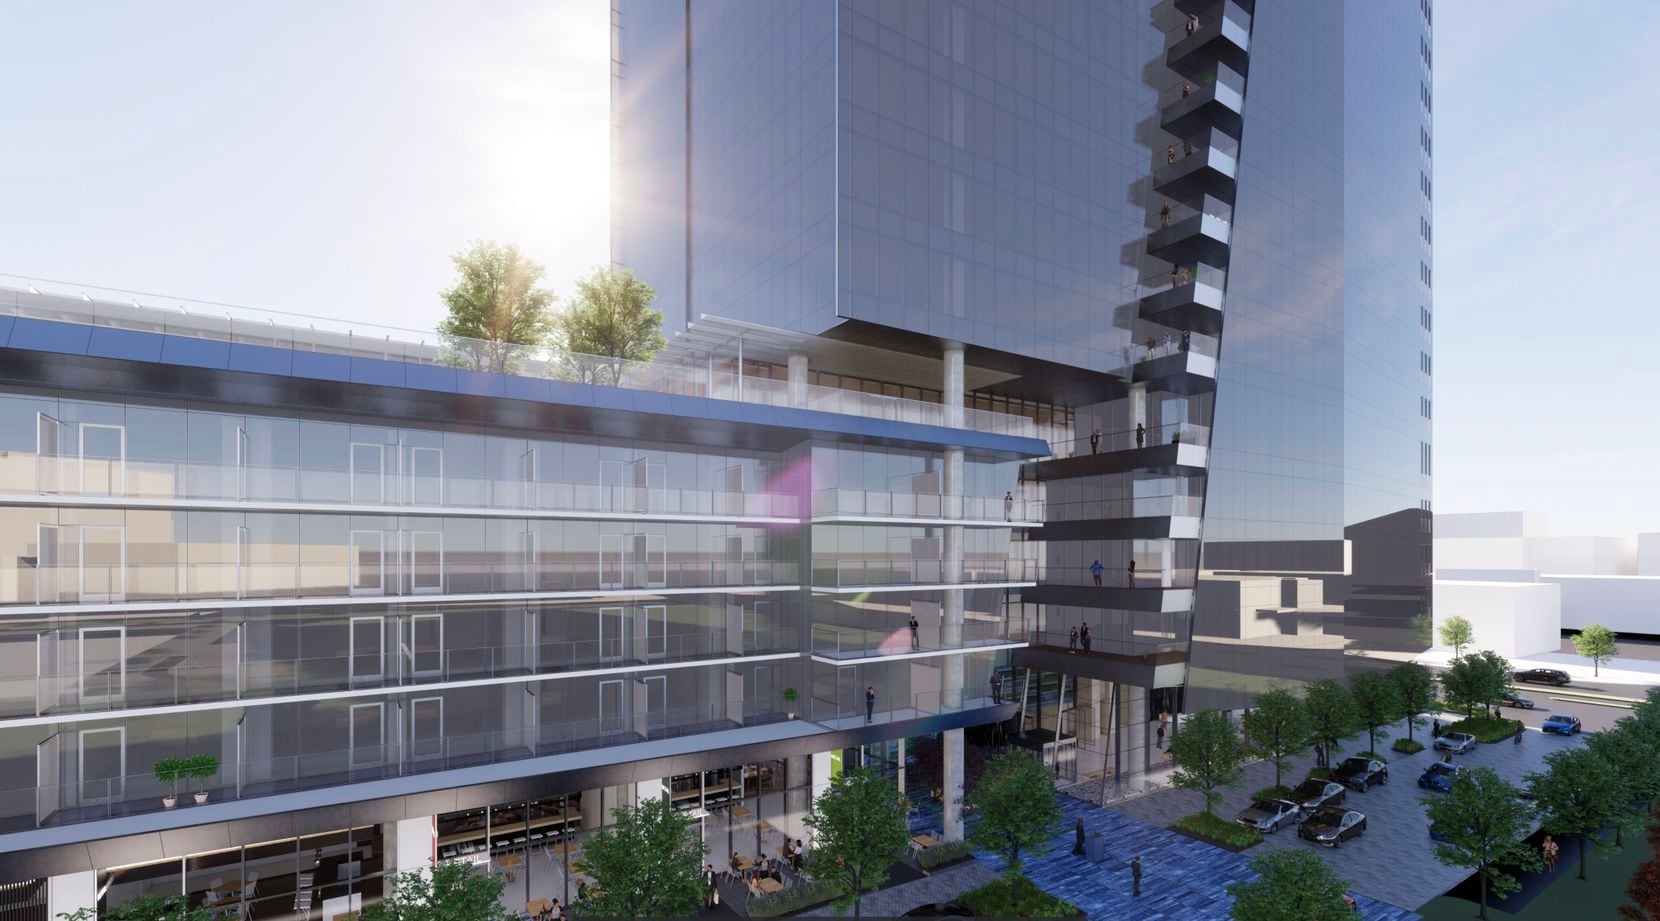 The Hall Park project will include a 16-story office tower with balconies.